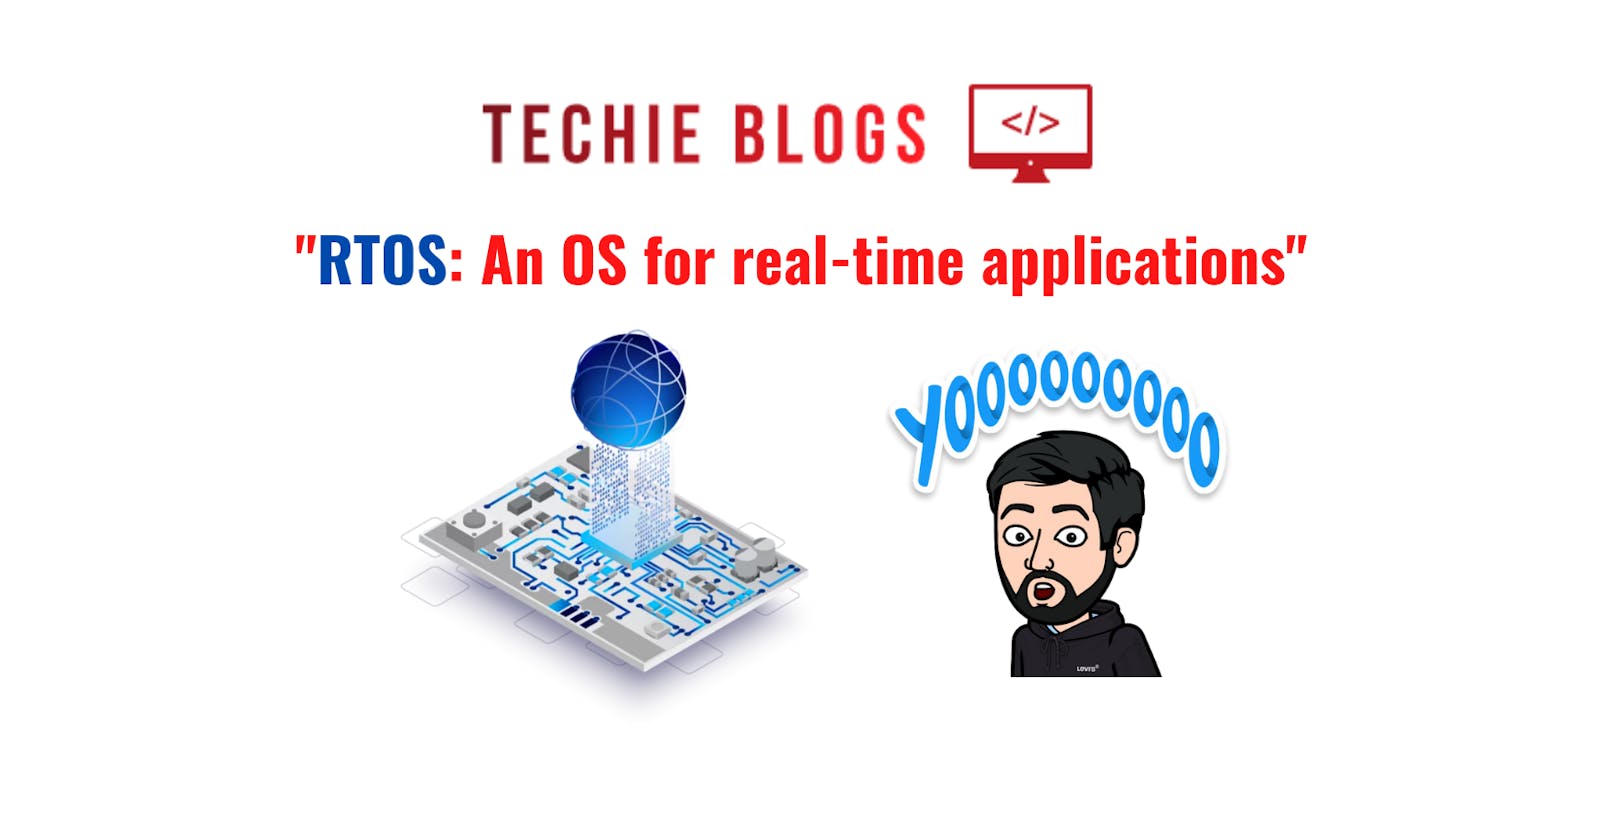 "RTOS: An OS for real-time applications"